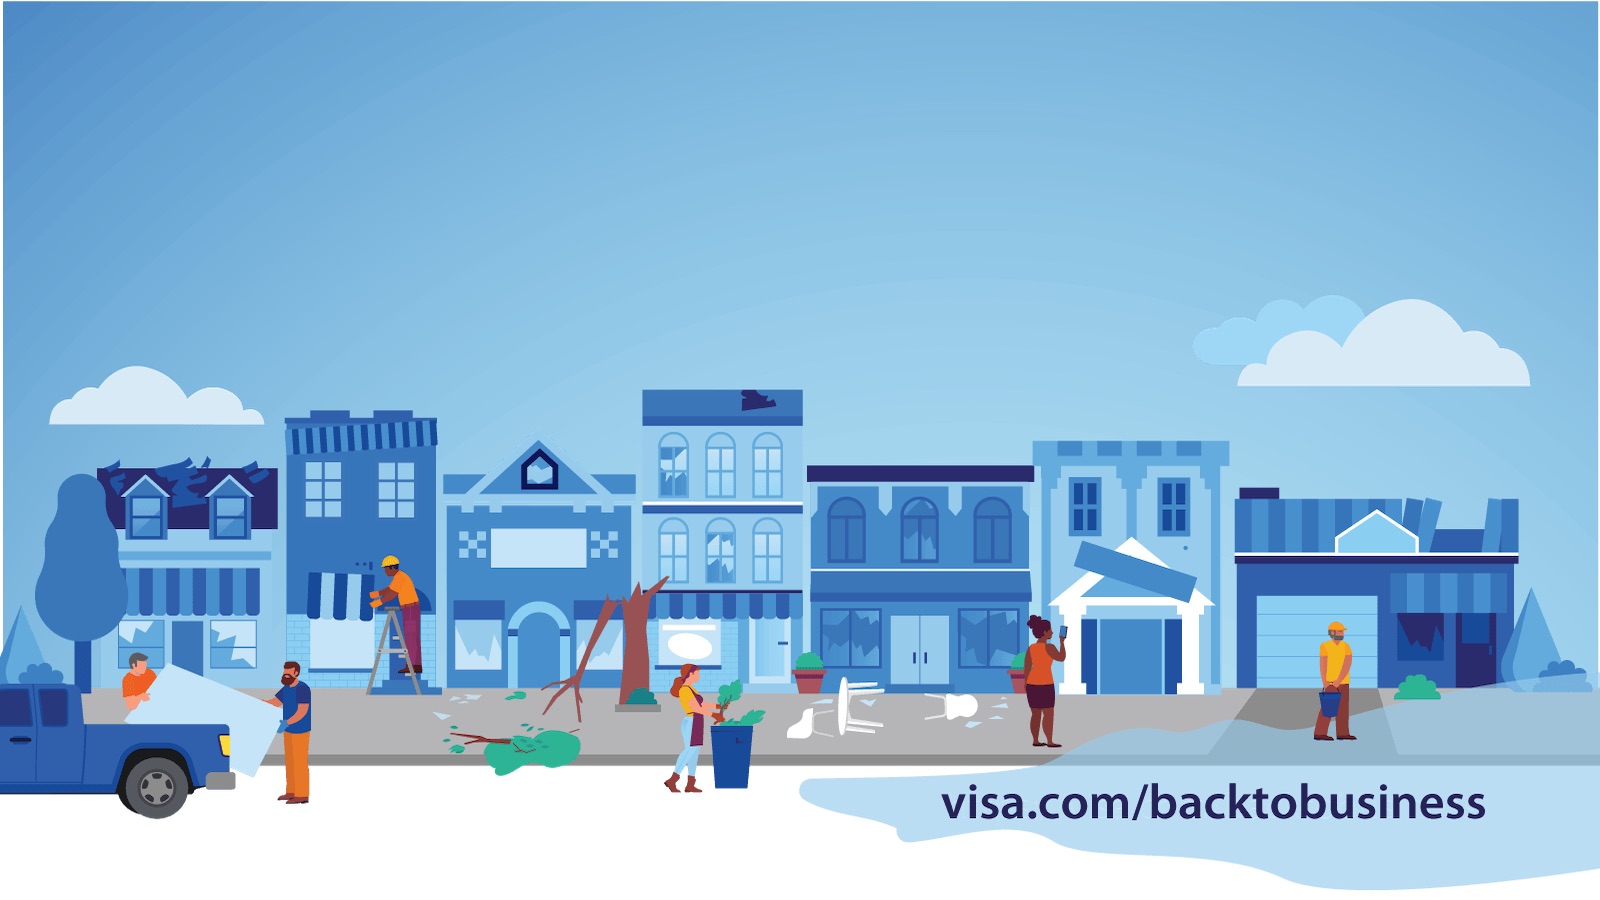 Illustration of people rebuilding a town area with Visa.com/backtobusiness at the lower right-hand corner.